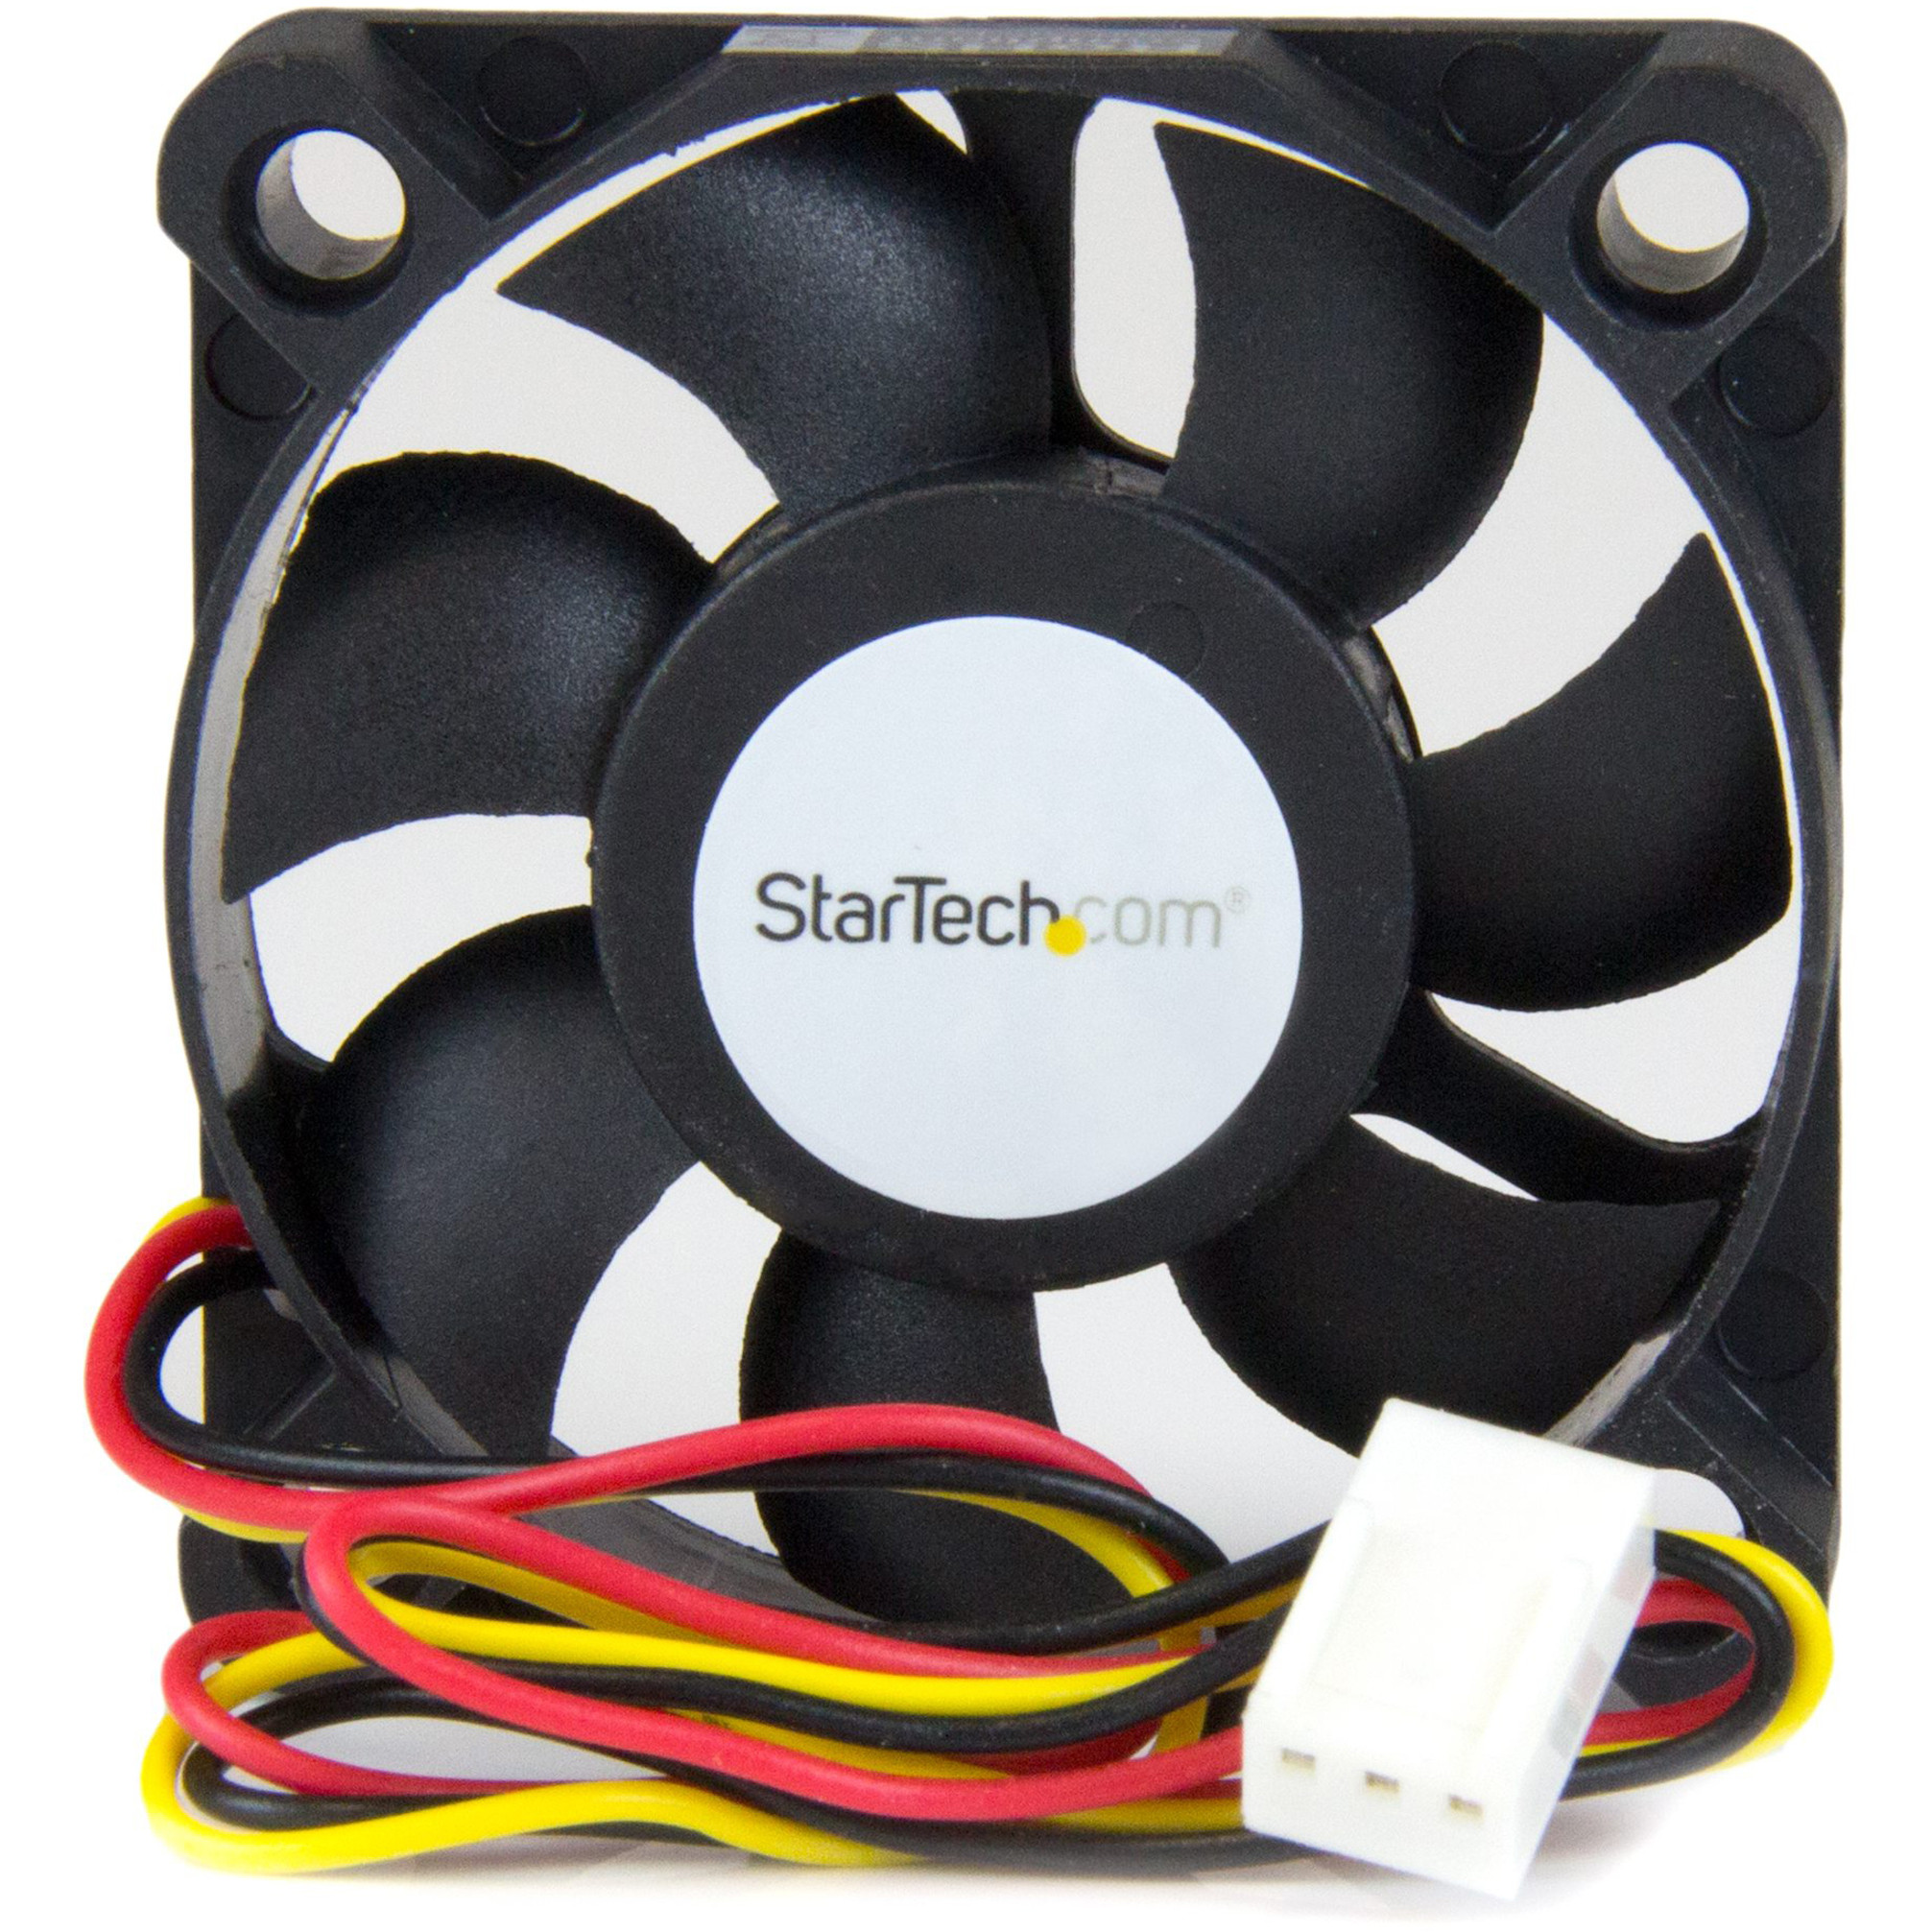 Startech .com Replacement 50mm Ball Bearing CPU Case FanLP4TX3 ConnectorSystem fan kit60 mmAdd additional chassis cooling with a… FAN5X1TX3